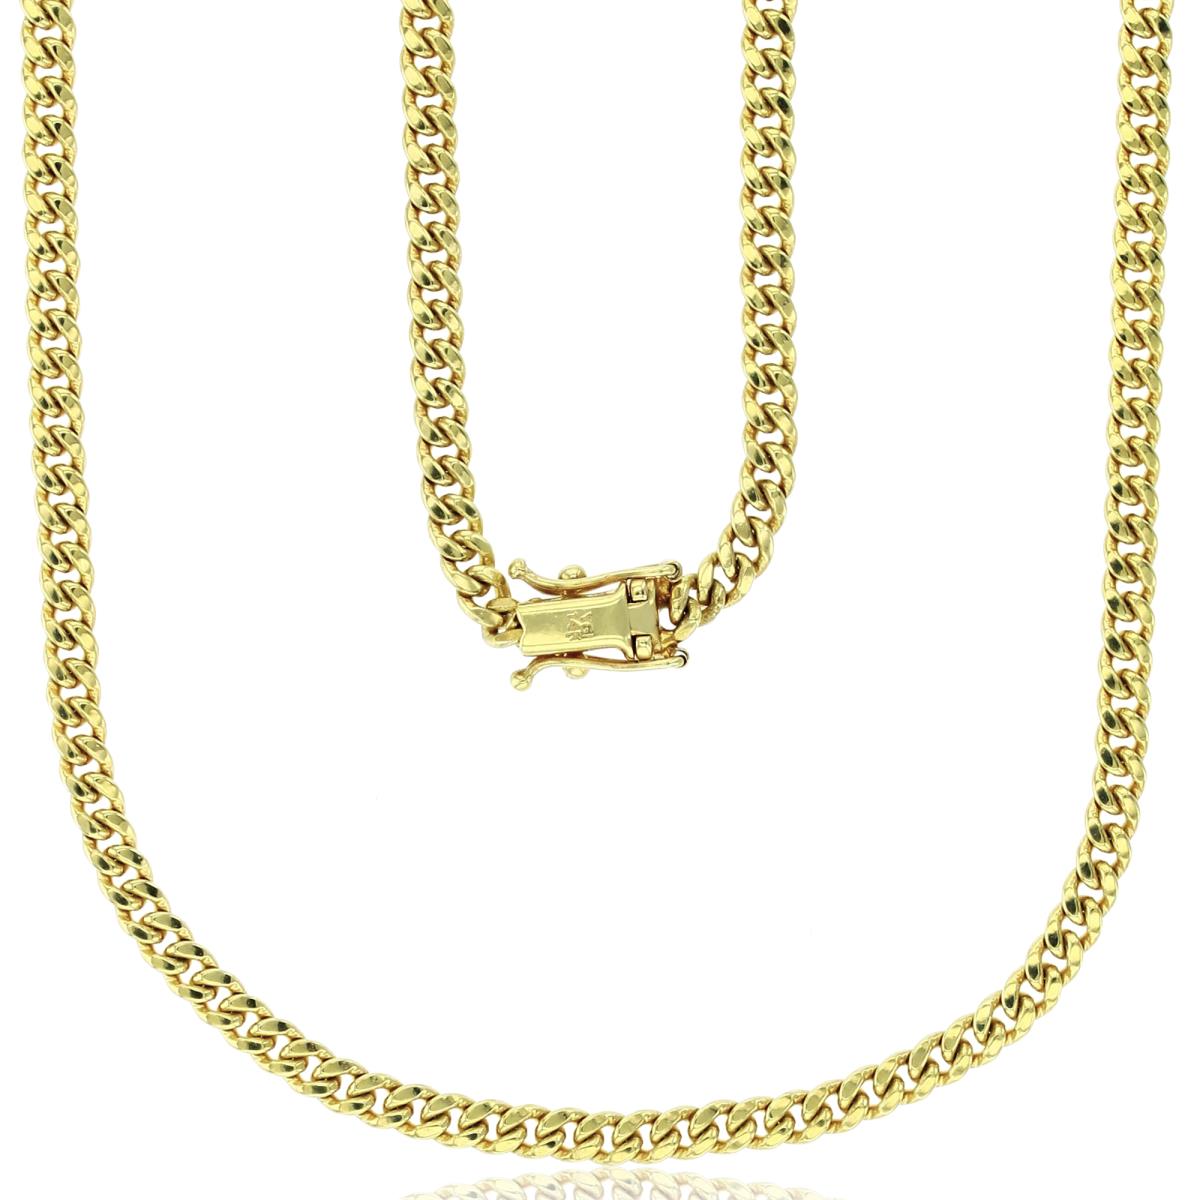 14K Yellow Gold 20" 100 Solid 3MM Miami Cuban Chain with Box Lock